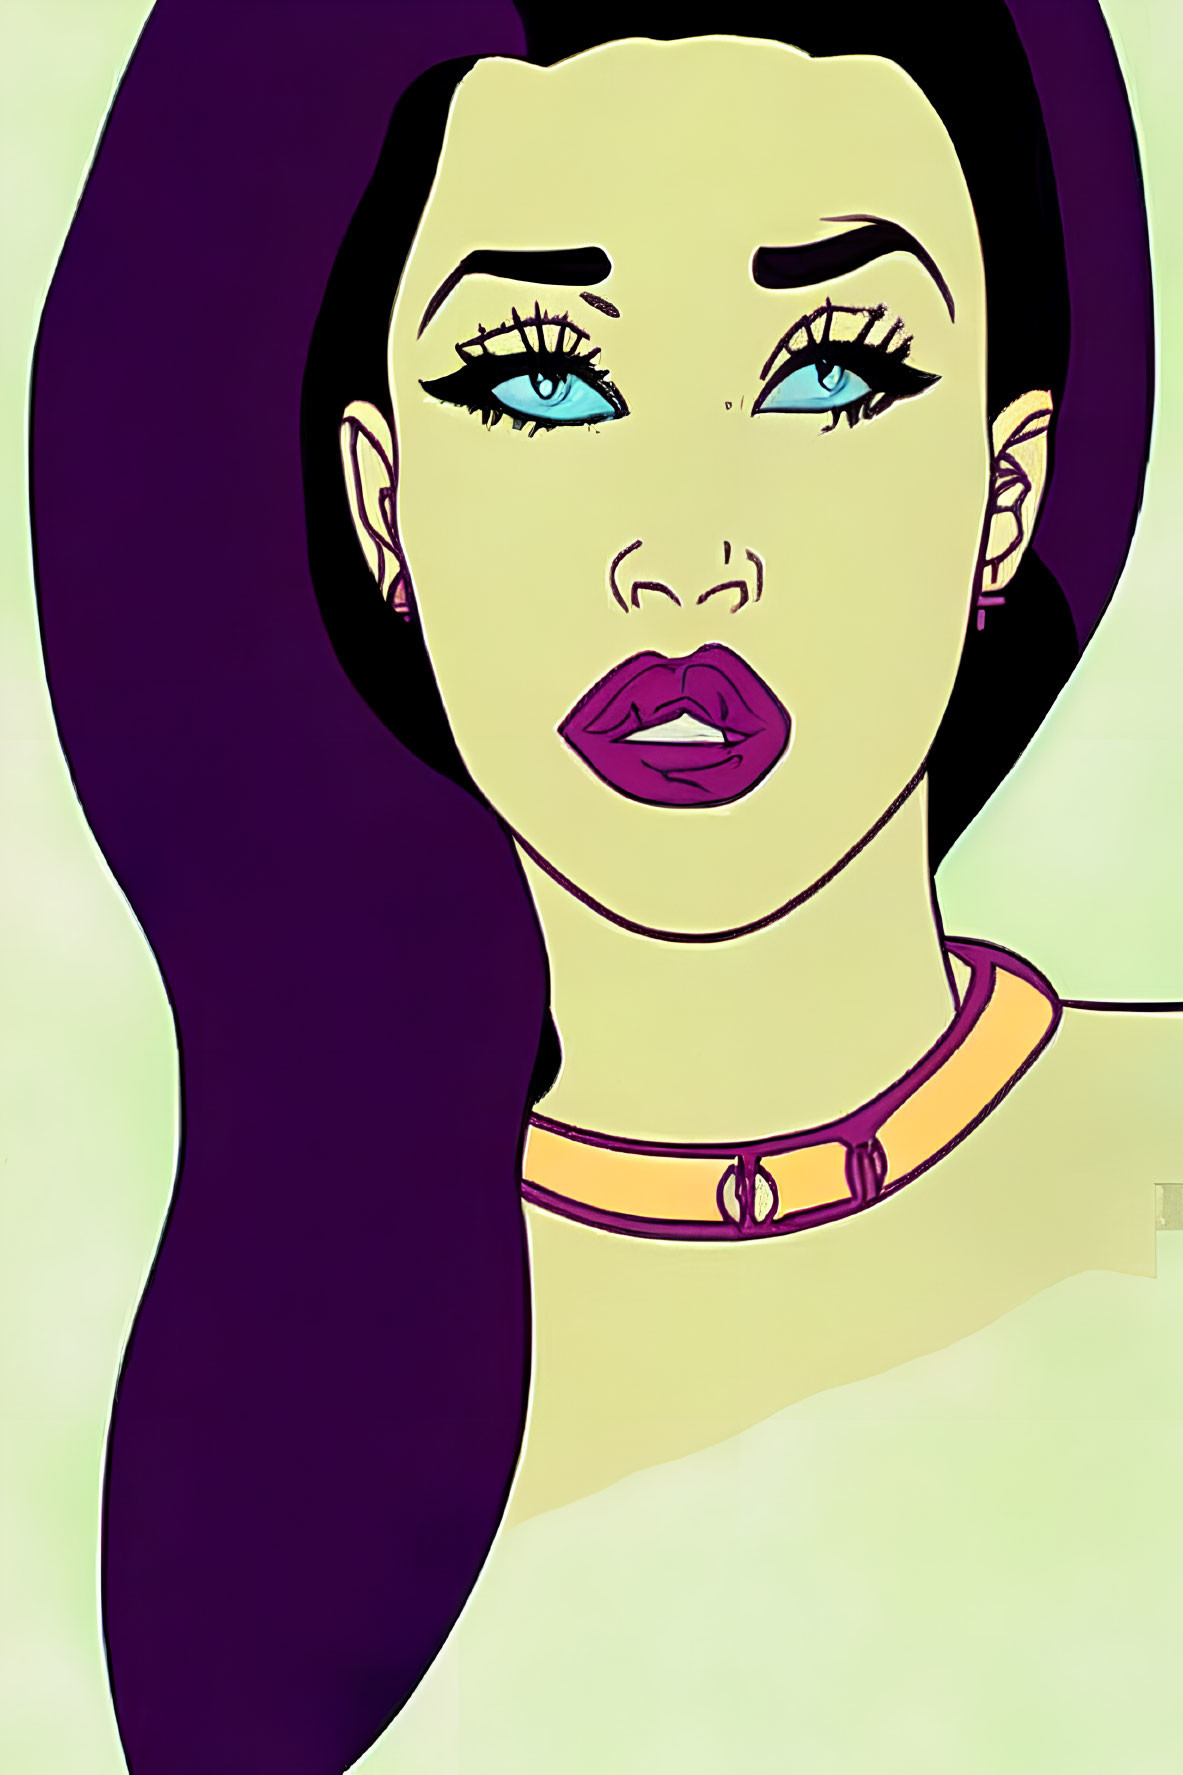 Illustration of a woman with purple hair, blue eyes, and pink choker